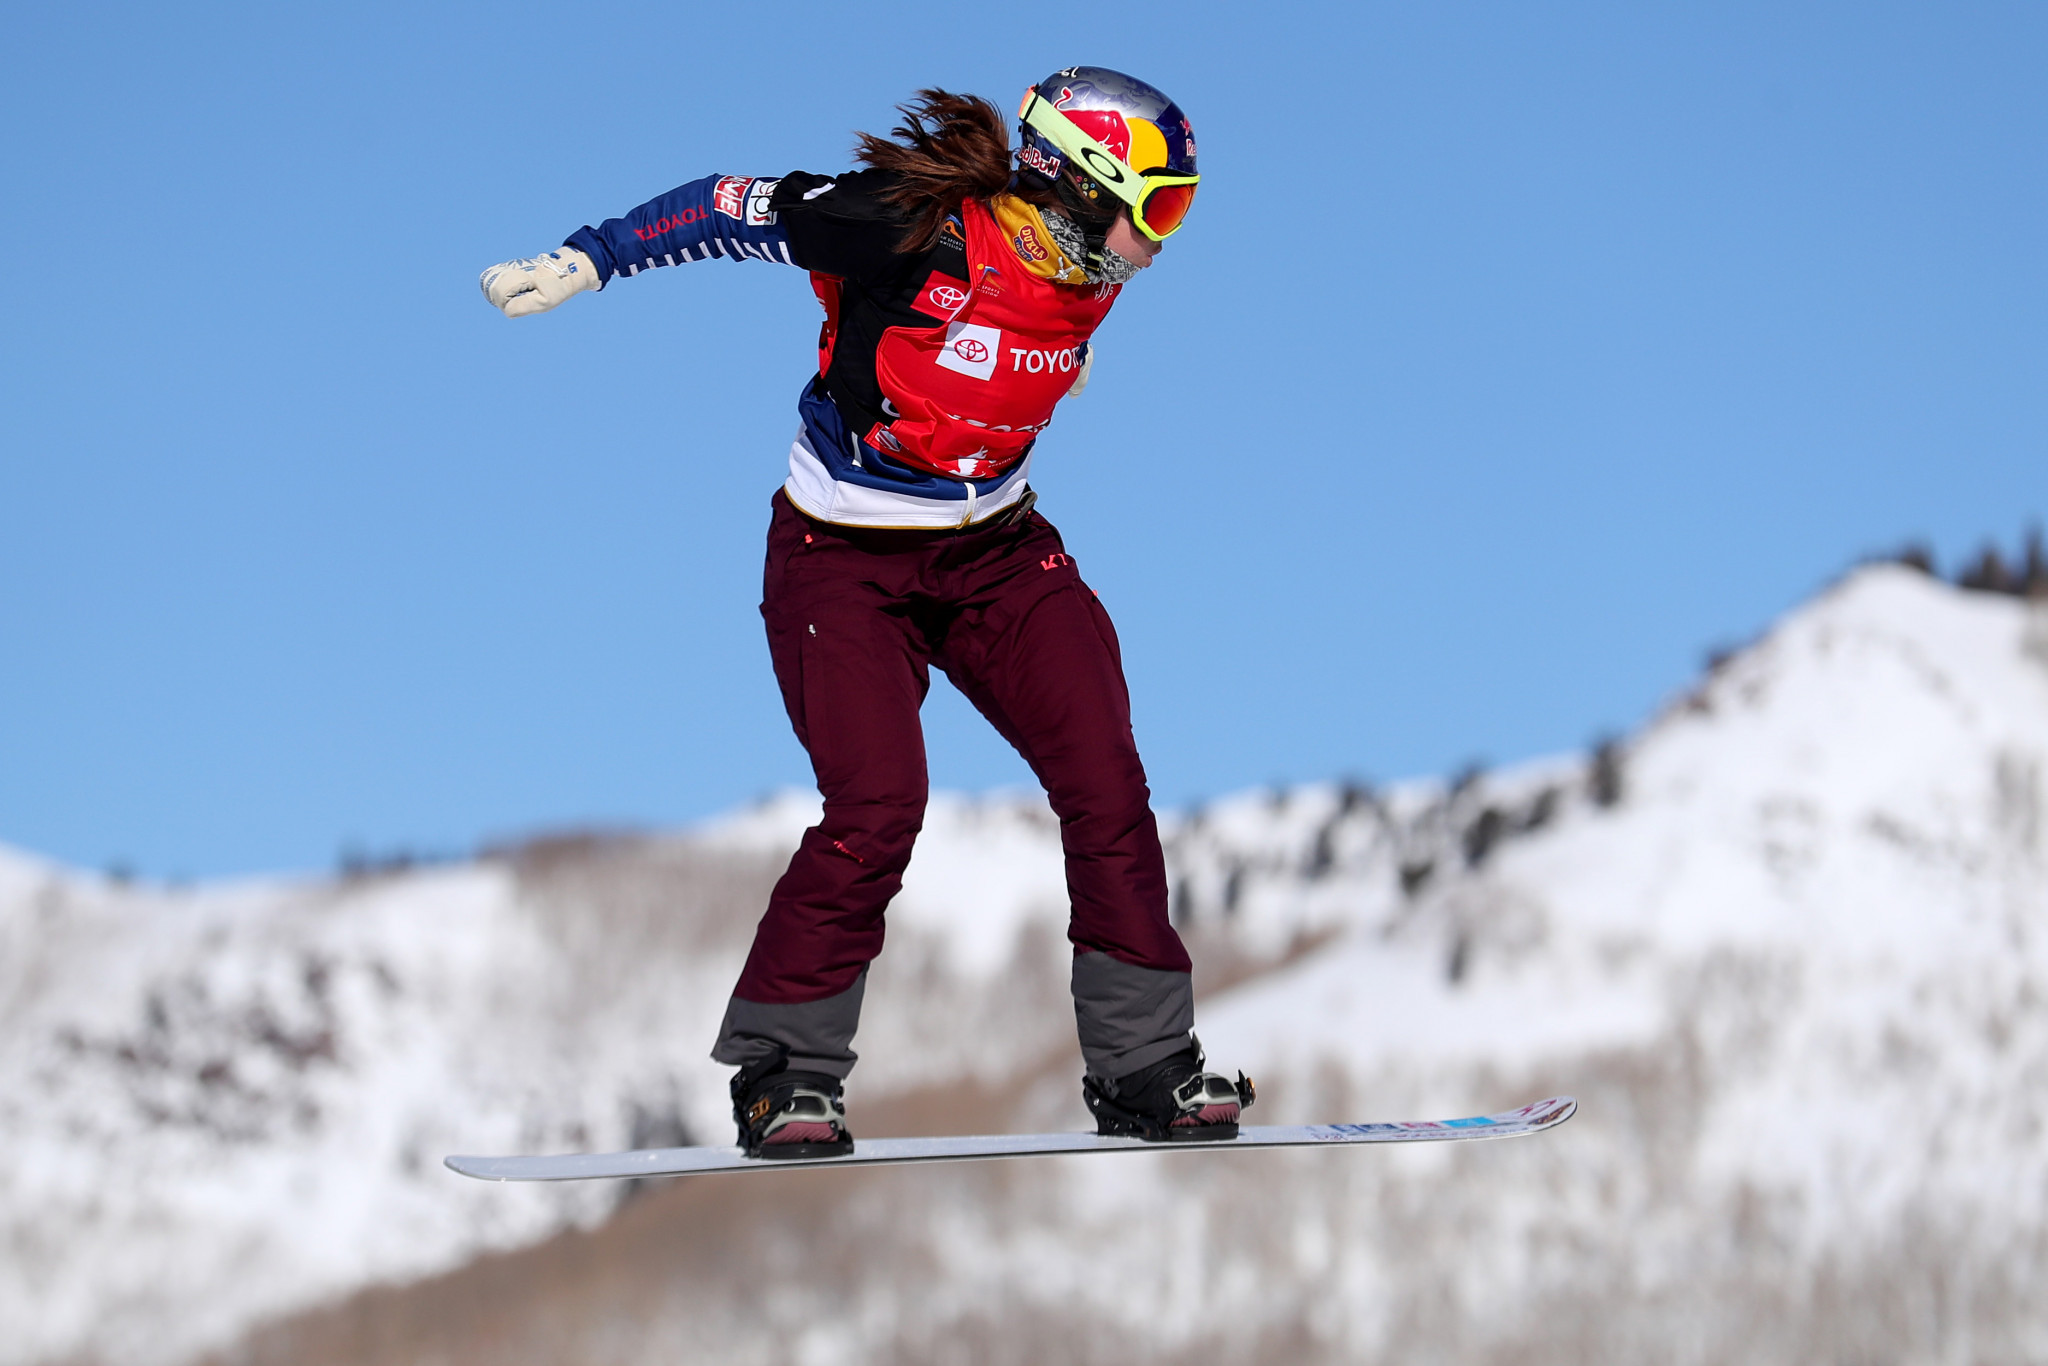 Samková impresses in women's qualifying at FIS Snowboard Cross World Cup